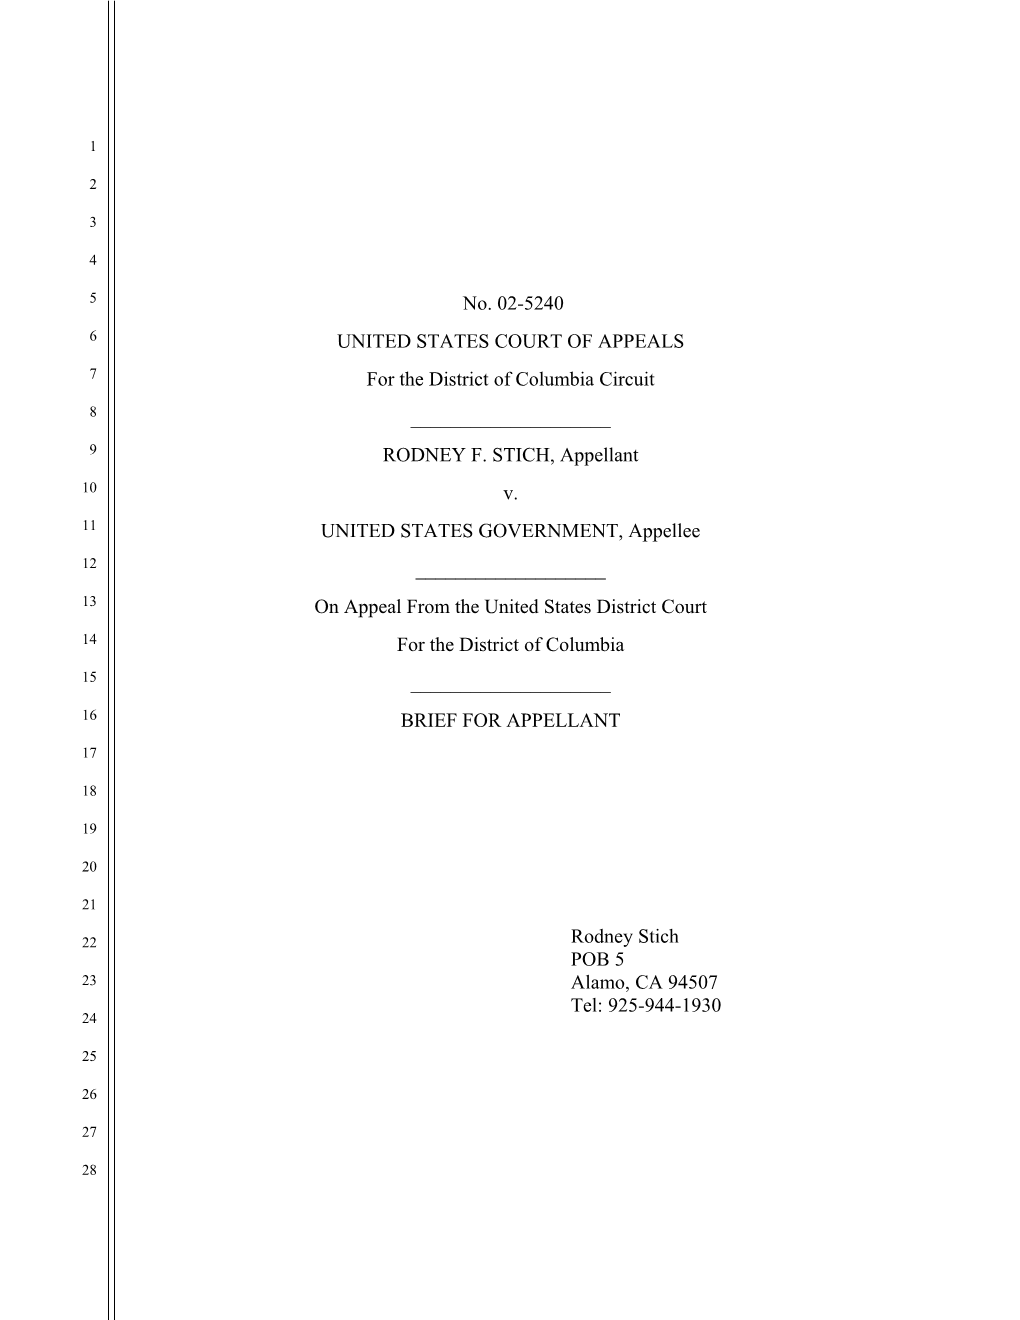 United States Court of Appeals s8